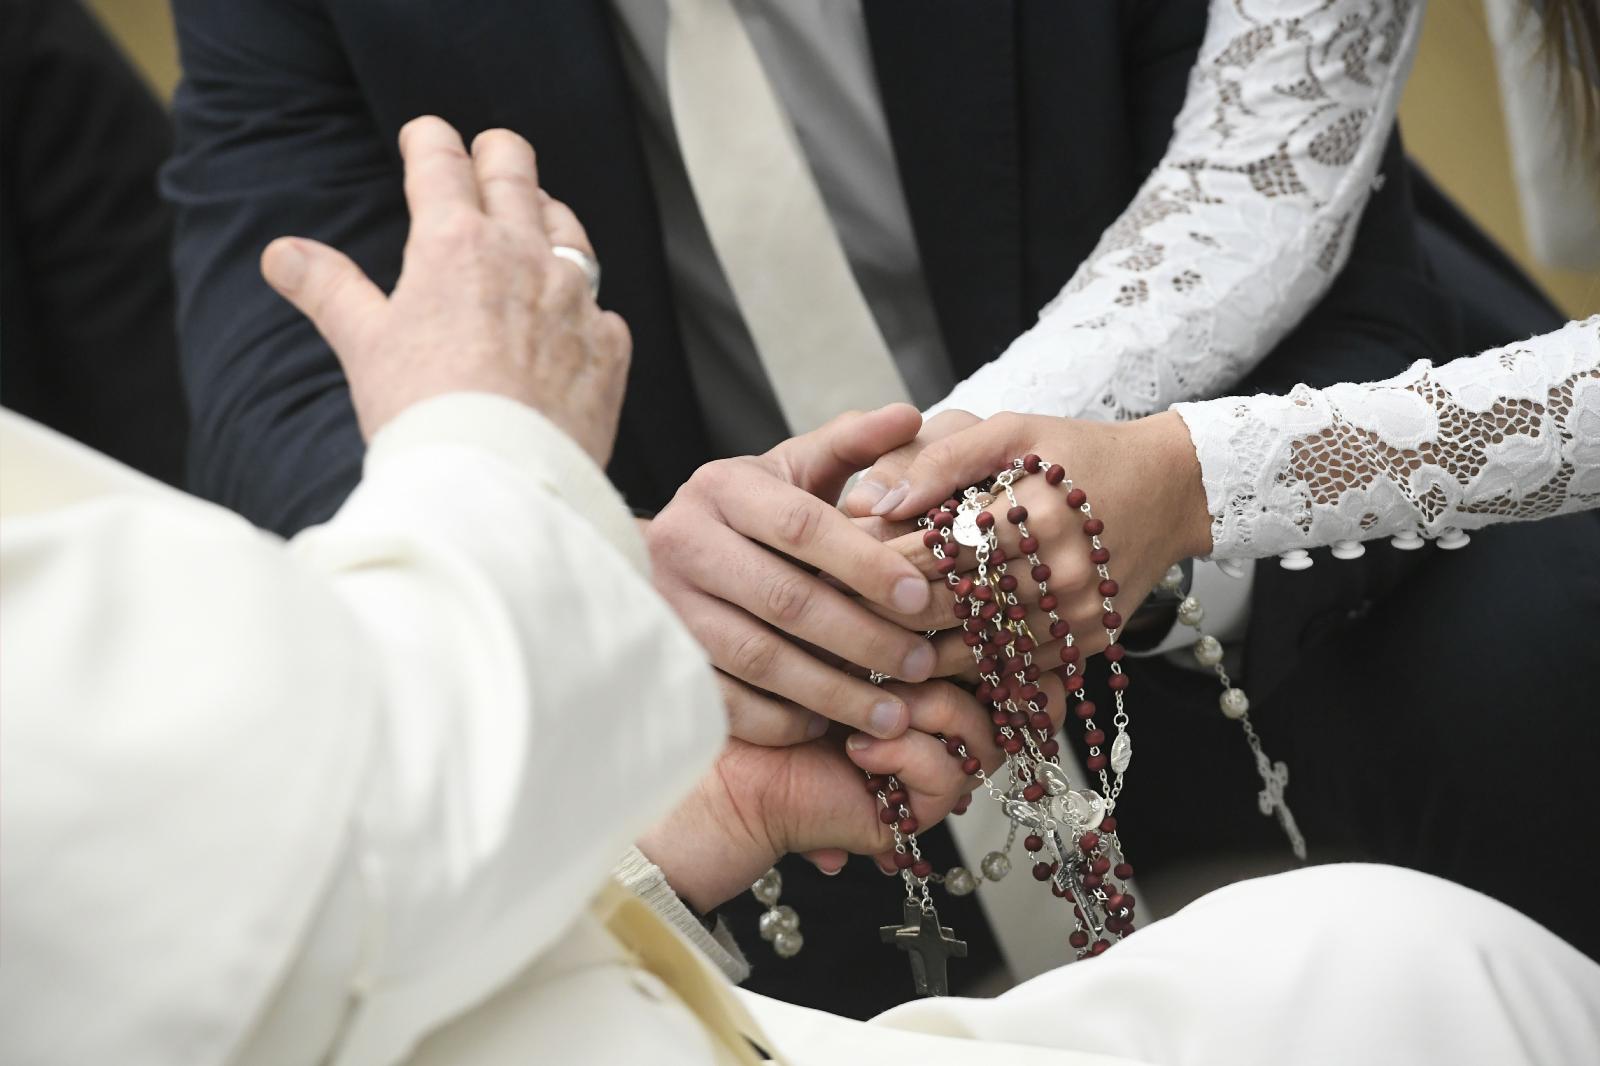 Pope Francis shakes hands with a bride.